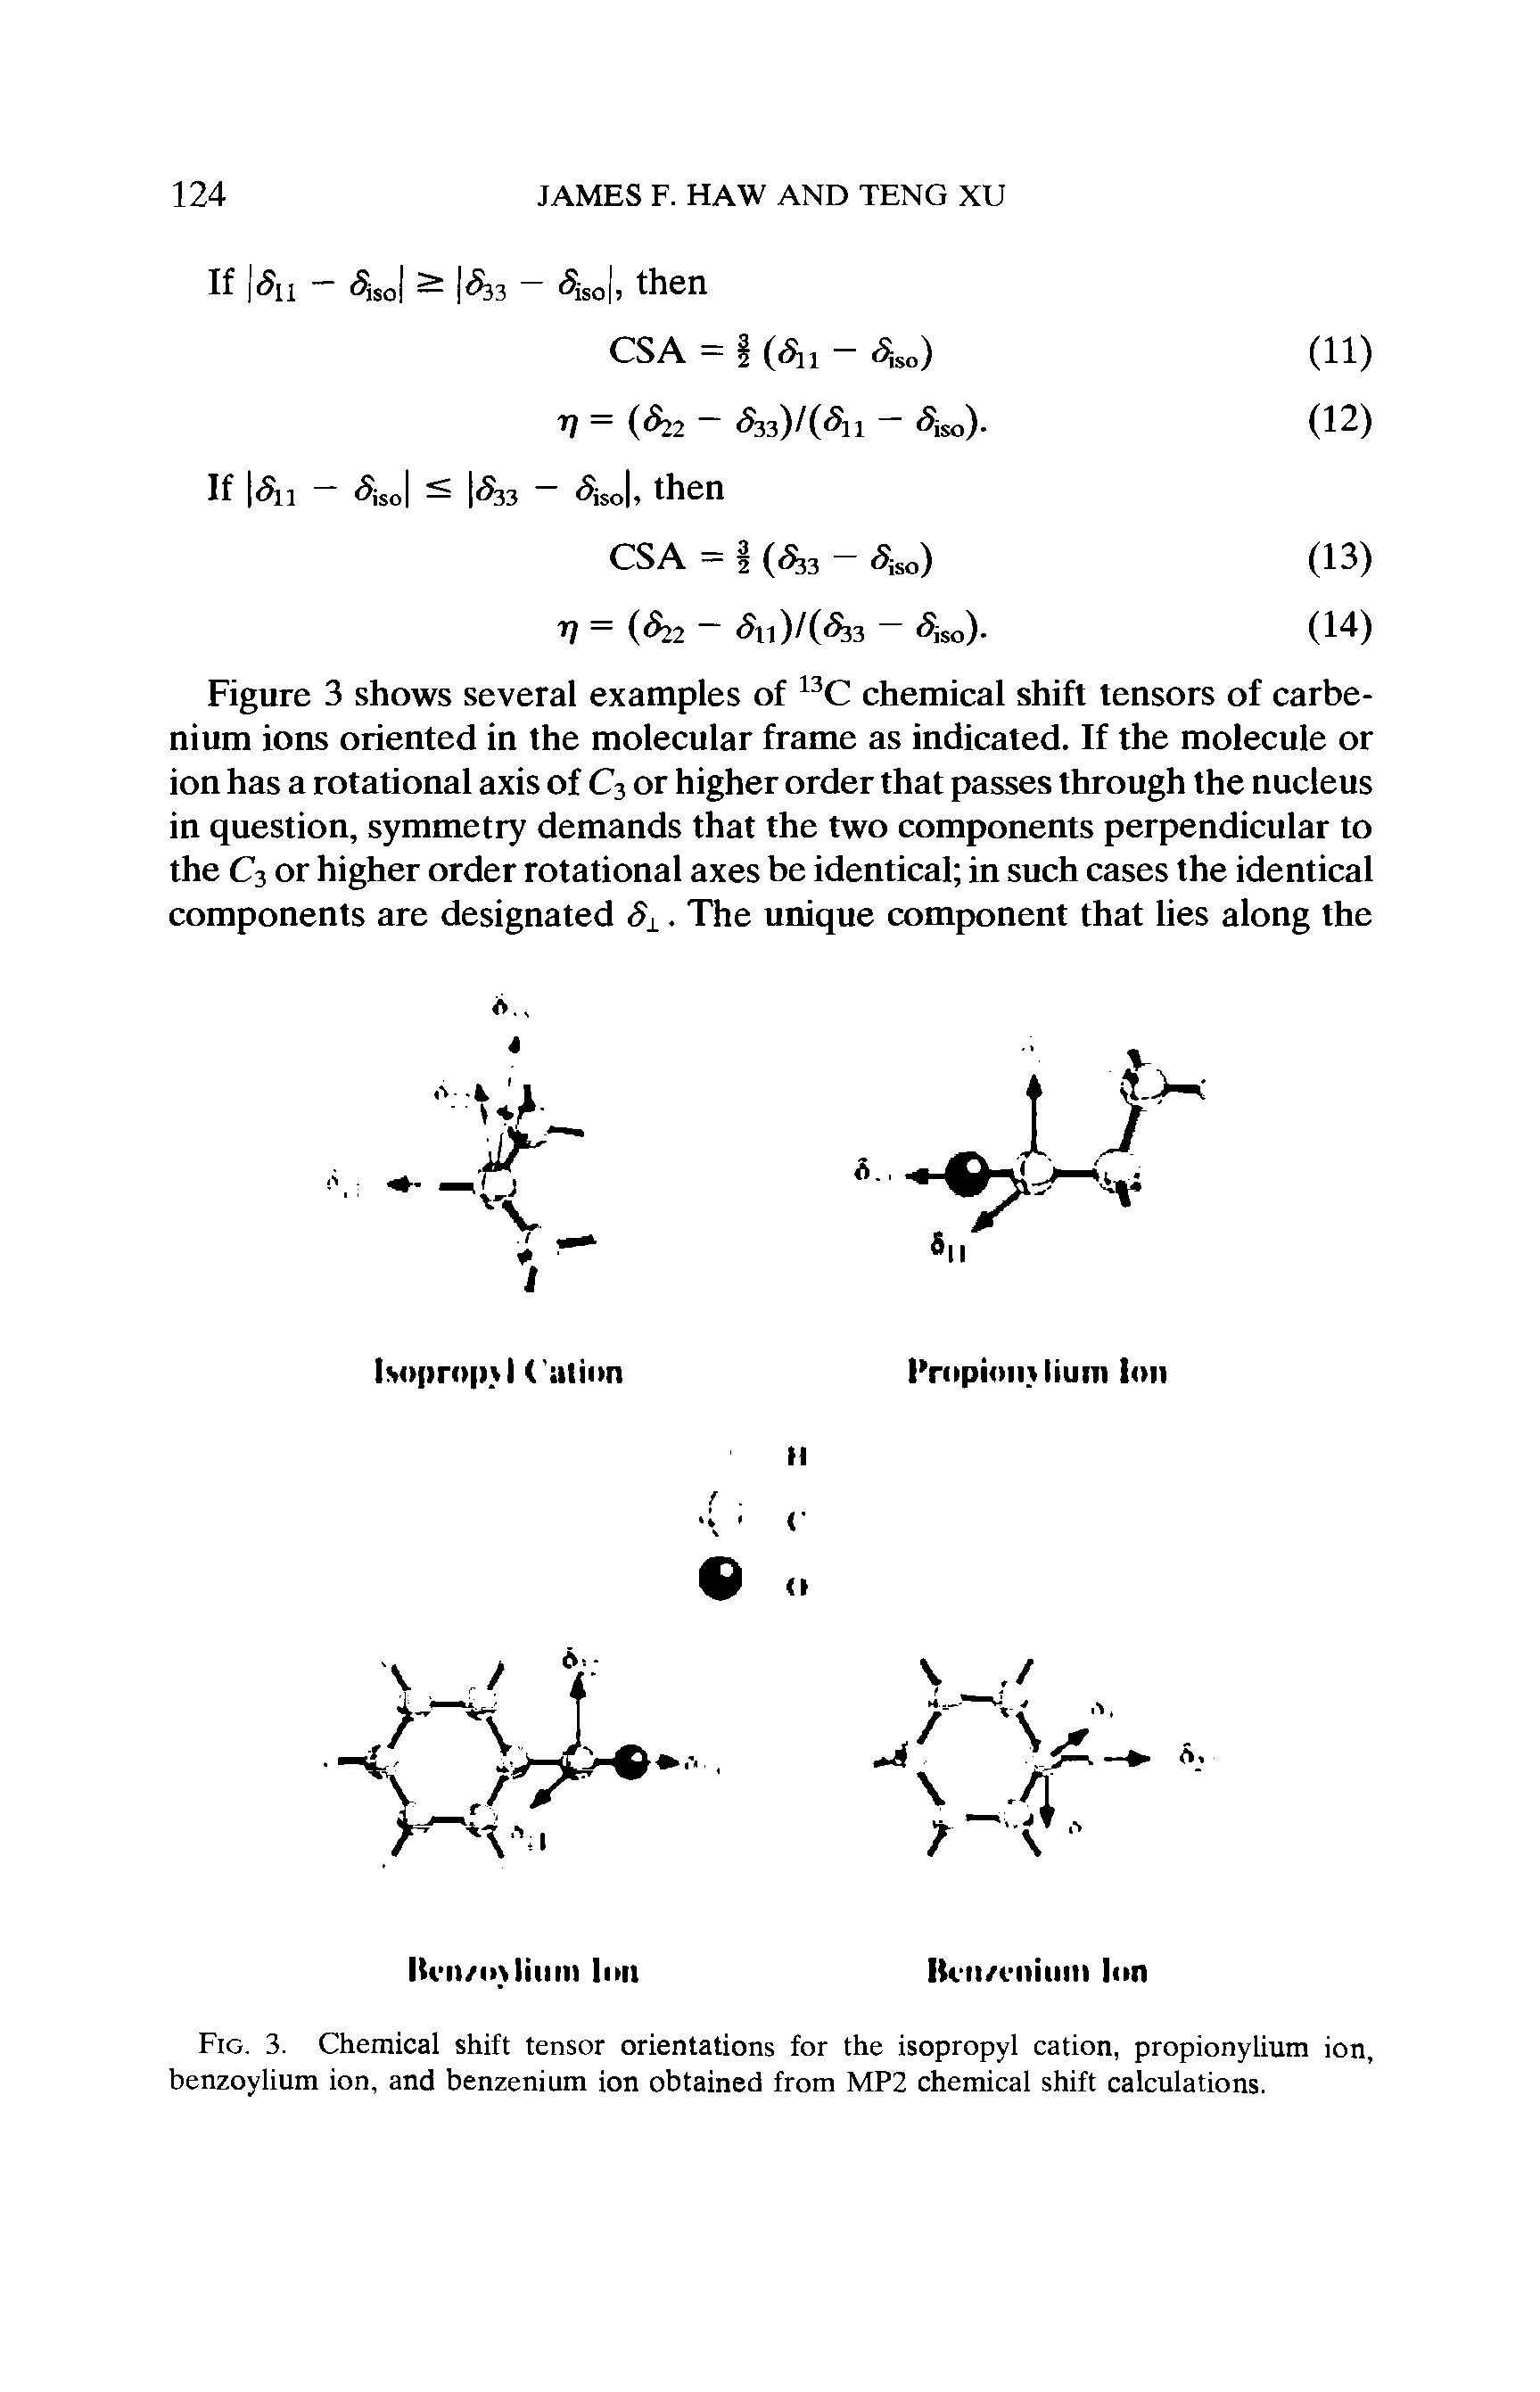 Fig. 3. Chemical shift tensor orientations for the isopropyl cation, propionylium ion, benzoylium ion, and benzenium ion obtained from MP2 chemical shift calculations.